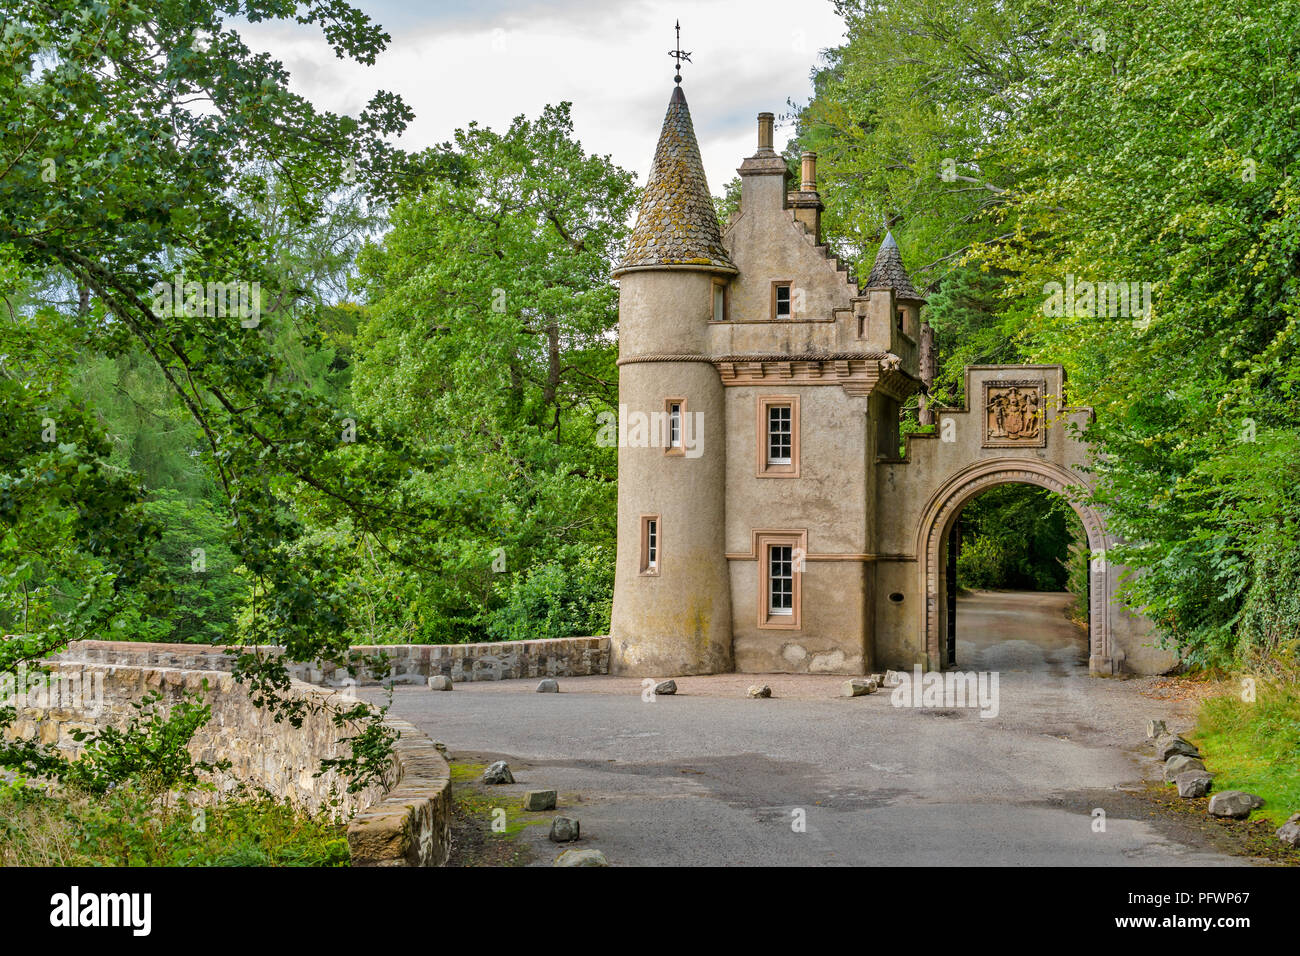 OLD BRIDGE OVER RIVER AVON SPEYSIDE SCOTLAND VIEW OF THE BARONIAL GATEHOUSE LEADING TO BALLINDALLOCH CASTLE Stock Photo